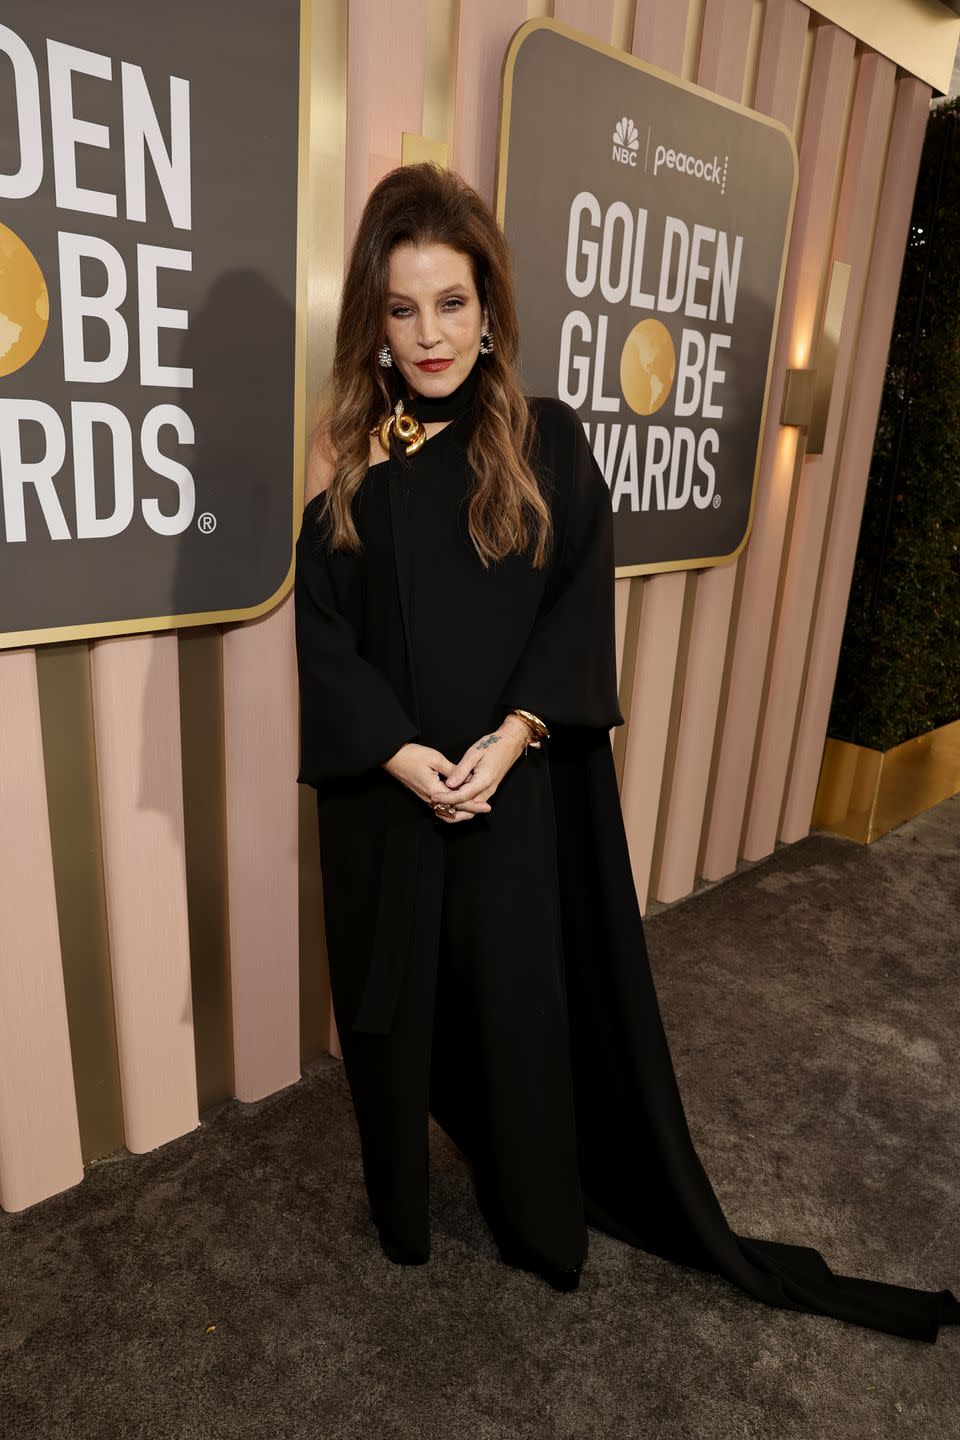 lisa marie presley posing for a photo at the golden globes red carpet